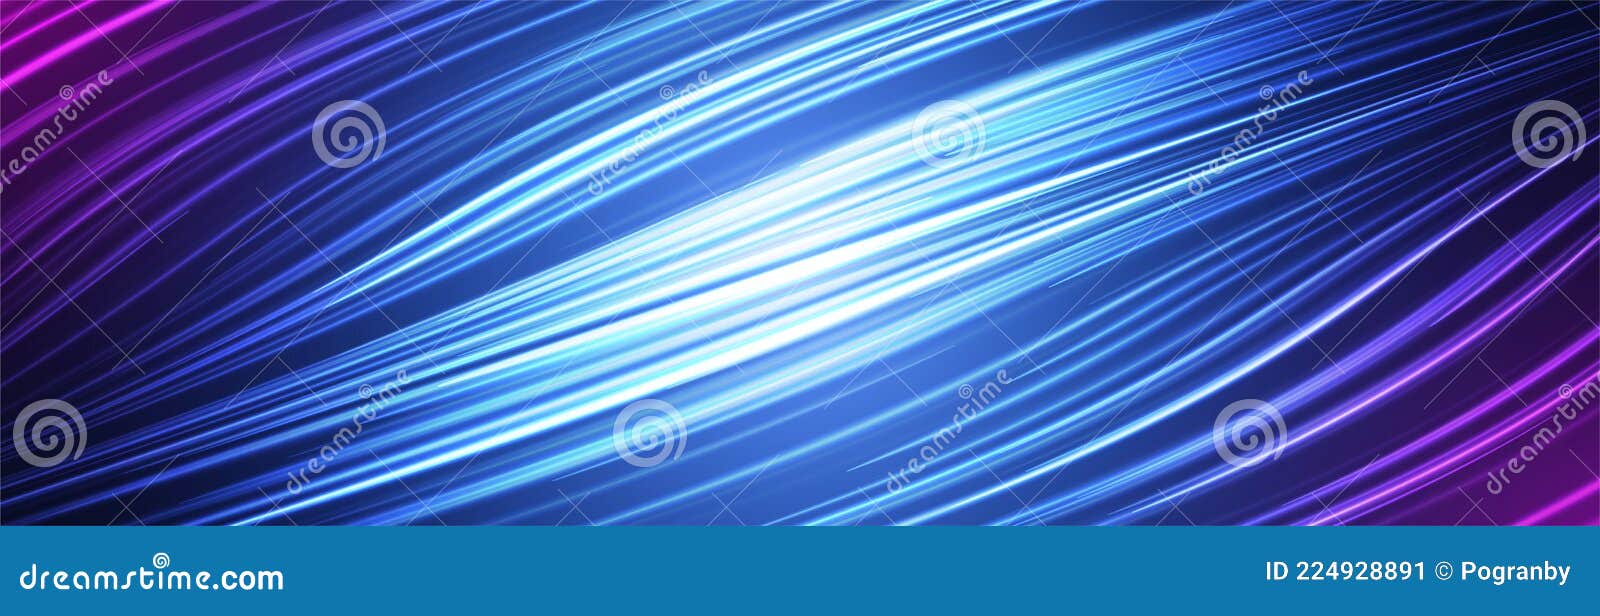 Abstract Neon Wallpaper. Smooth Line Pattern. Wavy Blue Lines. Geometric  Blur Lights. Cyan Bright Center Stock Vector - Illustration of lights,  energy: 224928891